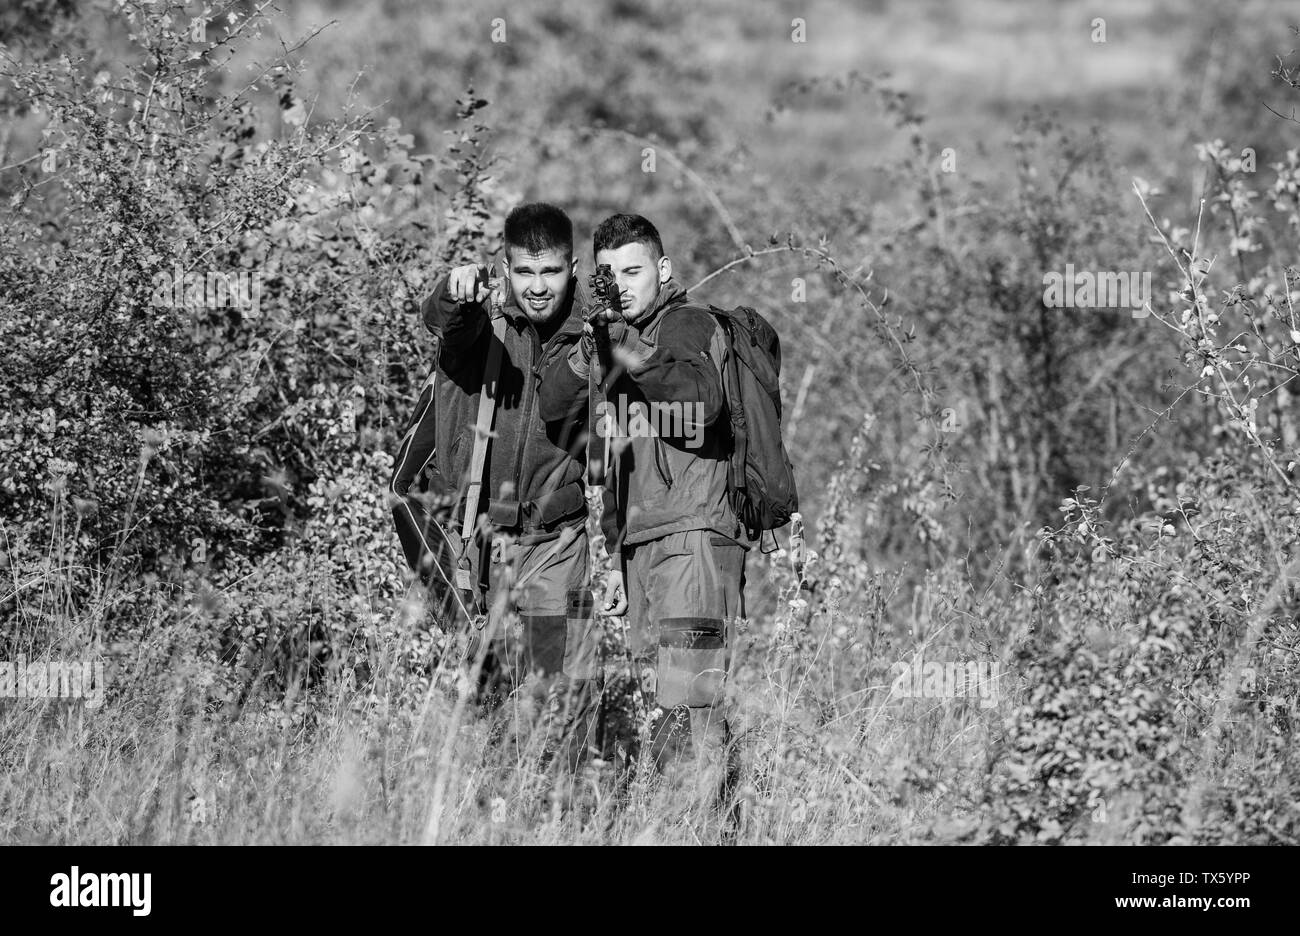 Friendship of men hunters. Man hunters with rifle gun. Boot camp. Military uniform fashion. Army forces. Camouflage. Hunting skills and weapon equipment. How turn hunting into hobby. best friends. Stock Photo